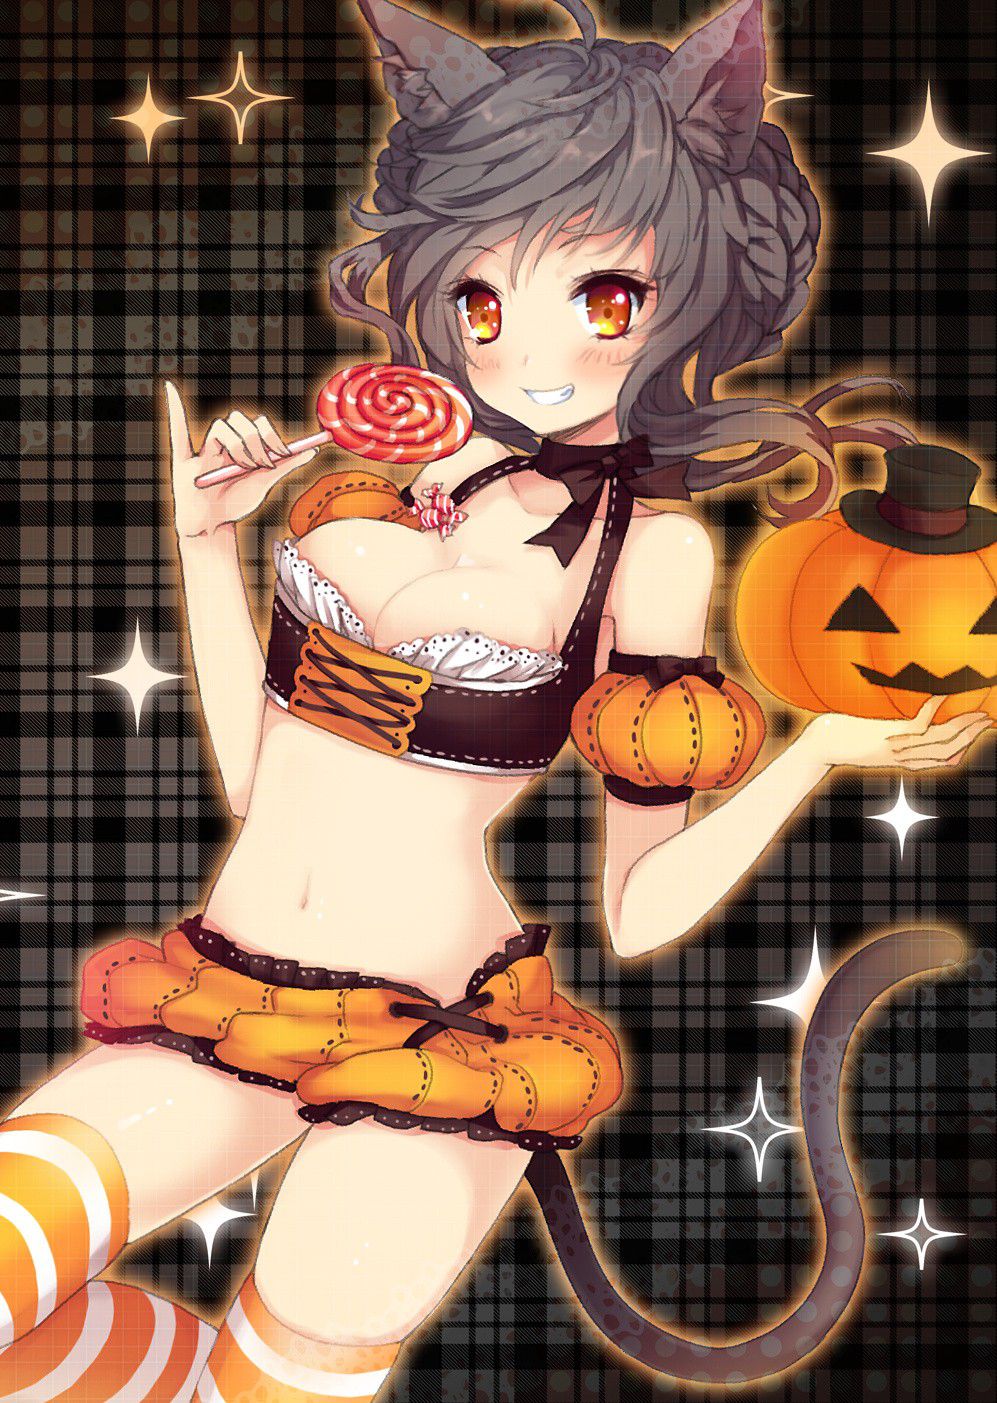 Secondary image of the cute girl who did the Halloween costume Part 2 [non-erotic] 15